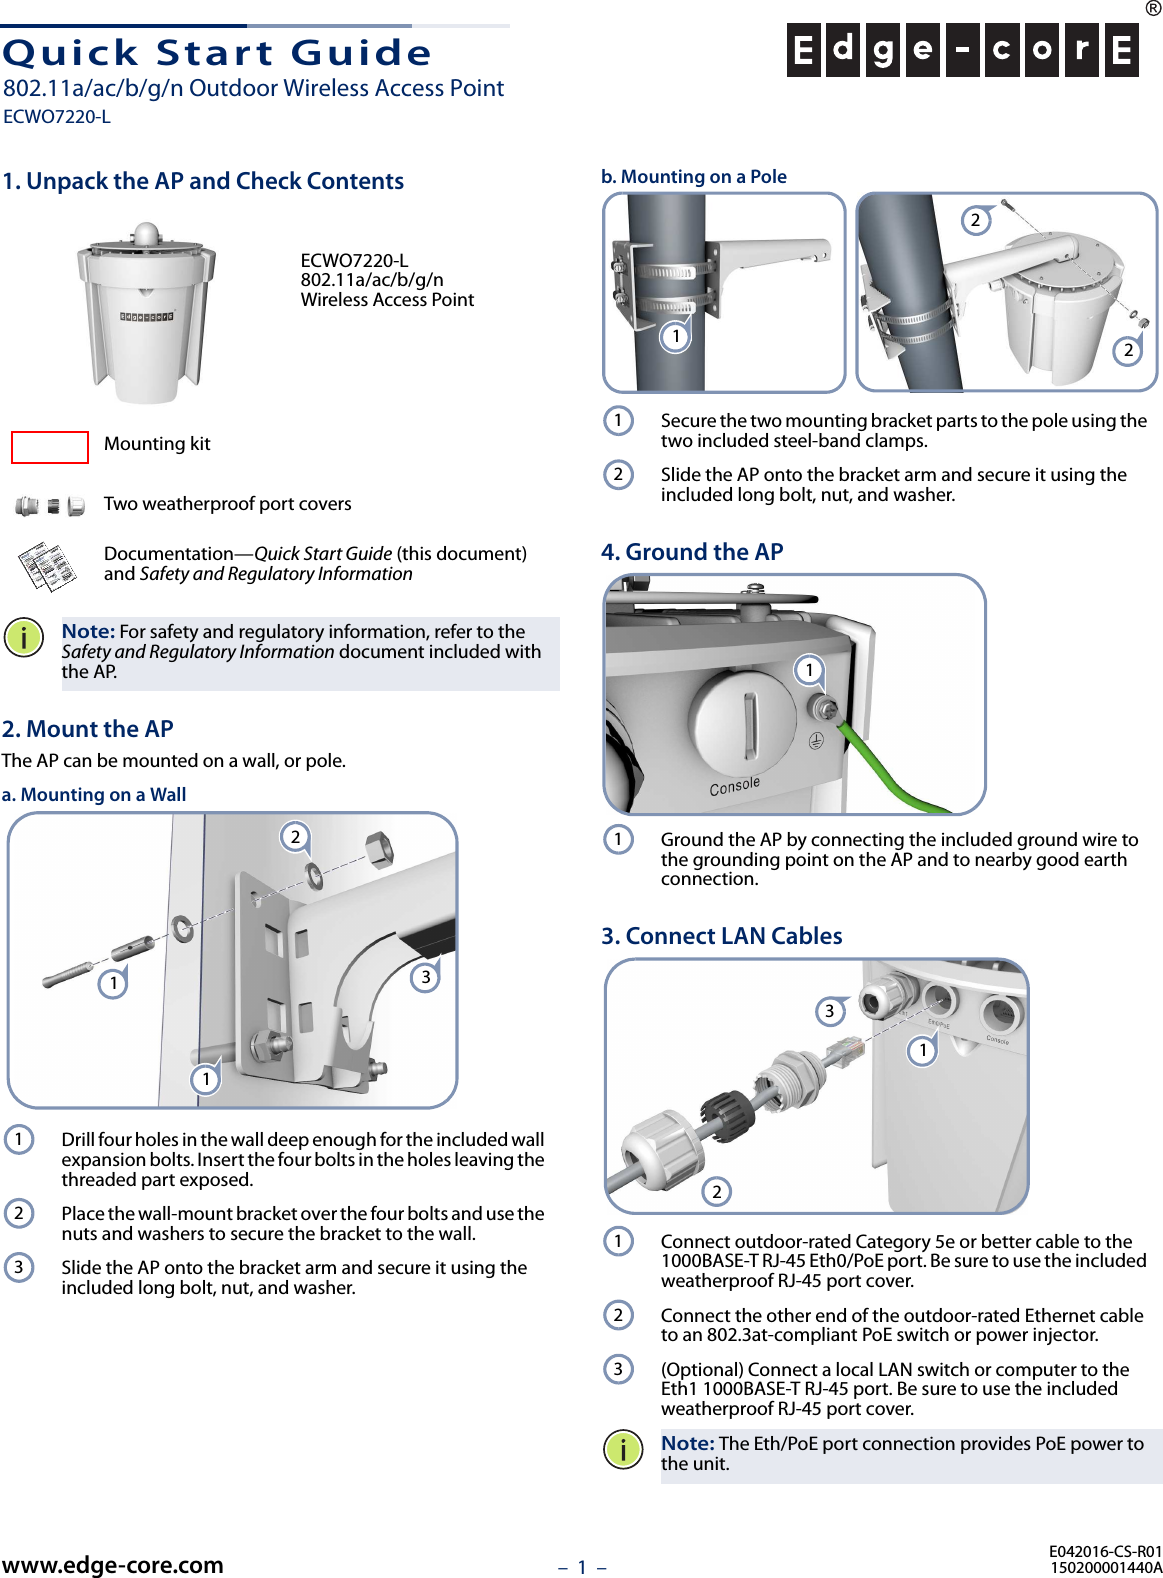 –  1  –Quick Start Guide1. Unpack the AP and Check ContentsECWO7220-L 802.11a/ac/b/g/n Wireless Access PointMounting kitTwo weatherproof port coversDocumentation—Quick Start Guide (this document) and Safety and Regulatory InformationNote: For safety and regulatory information, refer to the Safety and Regulatory Information document included with the AP.2. Mount the APThe AP can be mounted on a wall, or pole.a. Mounting on a WallDrill four holes in the wall deep enough for the included wall expansion bolts. Insert the four bolts in the holes leaving the threaded part exposed.Place the wall-mount bracket over the four bolts and use the nuts and washers to secure the bracket to the wall.Slide the AP onto the bracket arm and secure it using the included long bolt, nut, and washer.3211123b. Mounting on a PoleSecure the two mounting bracket parts to the pole using the two included steel-band clamps.Slide the AP onto the bracket arm and secure it using the included long bolt, nut, and washer.4. Ground the APGround the AP by connecting the included ground wire to the grounding point on the AP and to nearby good earth connection.3. Connect LAN CablesConnect outdoor-rated Category 5e or better cable to the 1000BASE-T RJ-45 Eth0/PoE port. Be sure to use the included weatherproof RJ-45 port cover.Connect the other end of the outdoor-rated Ethernet cable to an 802.3at-compliant PoE switch or power injector.(Optional) Connect a local LAN switch or computer to the Eth1 1000BASE-T RJ-45 port. Be sure to use the included weatherproof RJ-45 port cover.Note: The Eth/PoE port connection provides PoE power to the unit.1221211123123E042016-CS-R01150200001440Awww.edge-core.com802.11a/ac/b/g/n Outdoor Wireless Access PointECWO7220-L